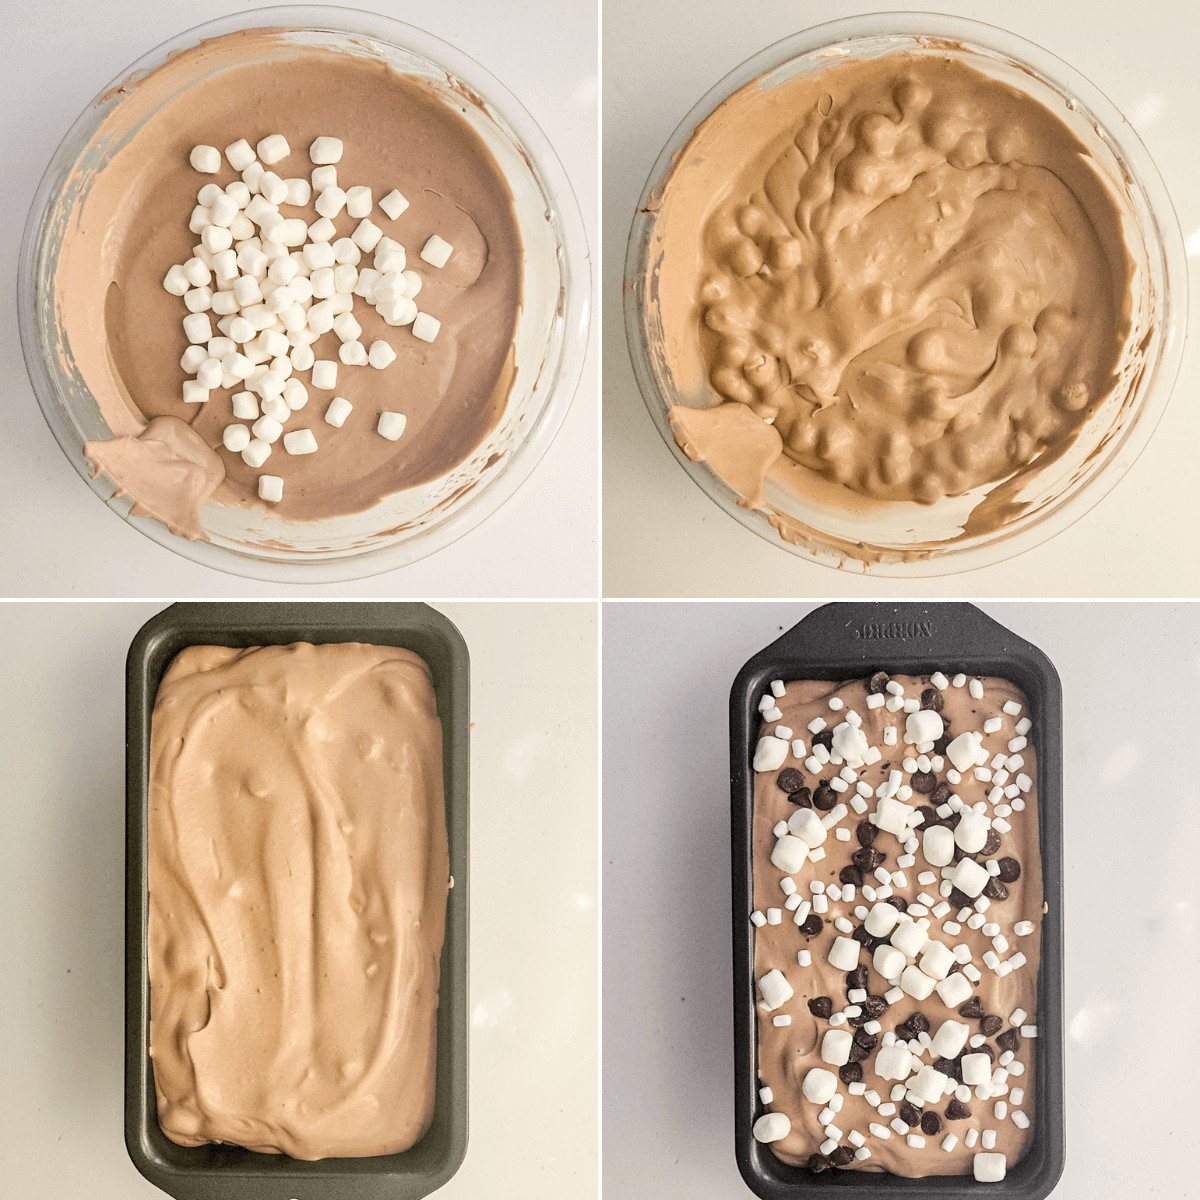 Four pictures showing the process of making a chocolate lava cake with condensed milk.